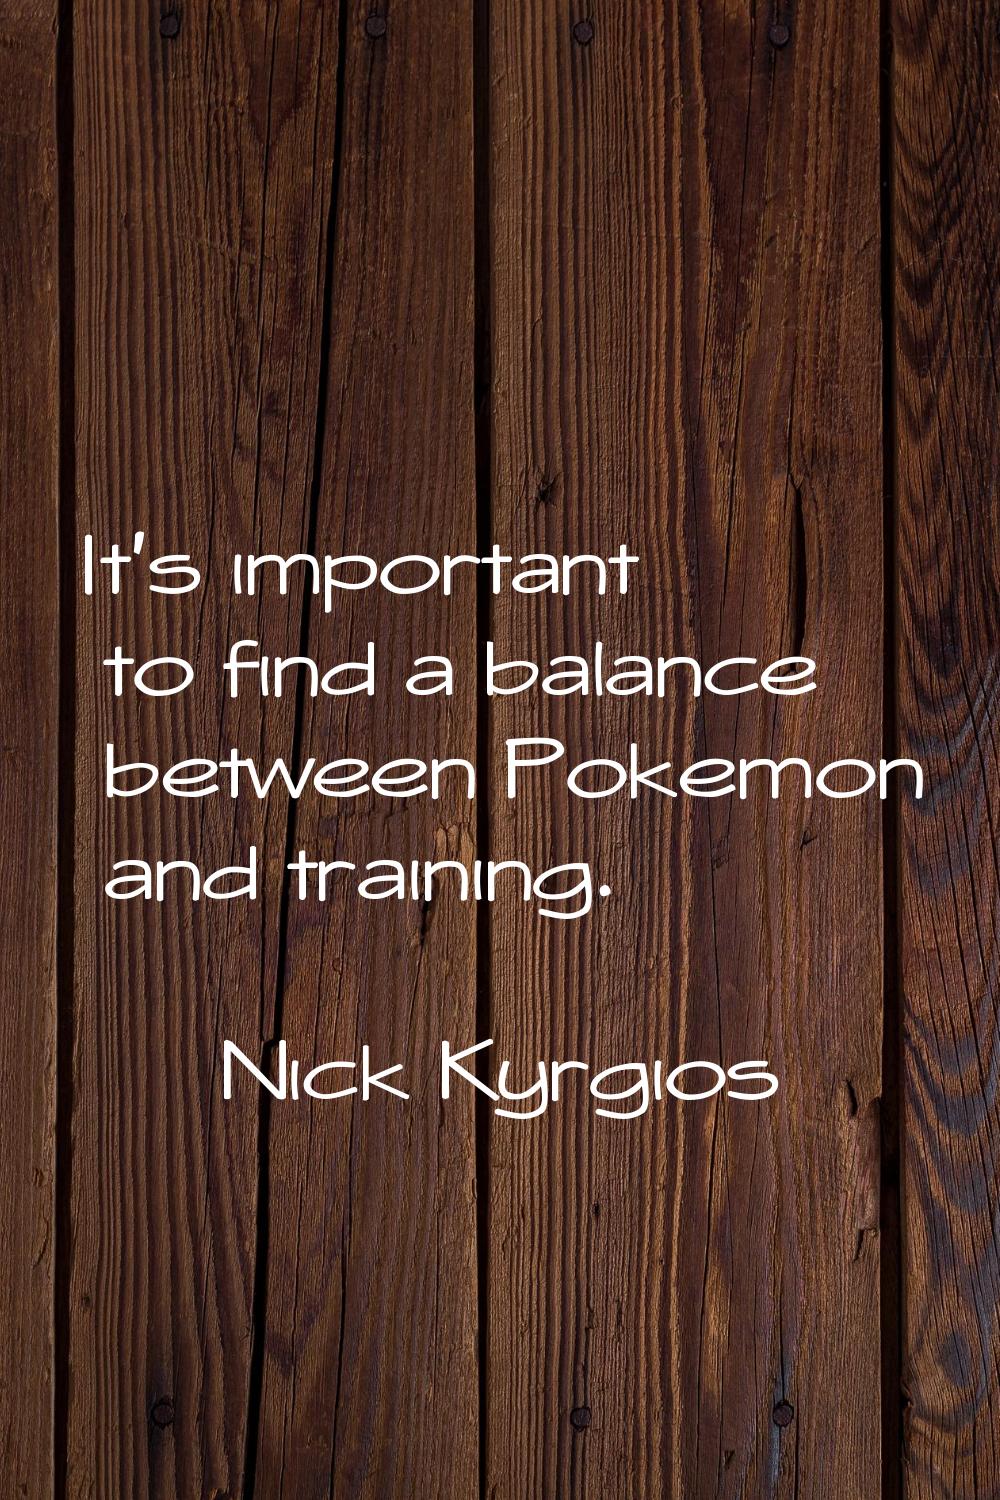 It's important to find a balance between Pokemon and training.